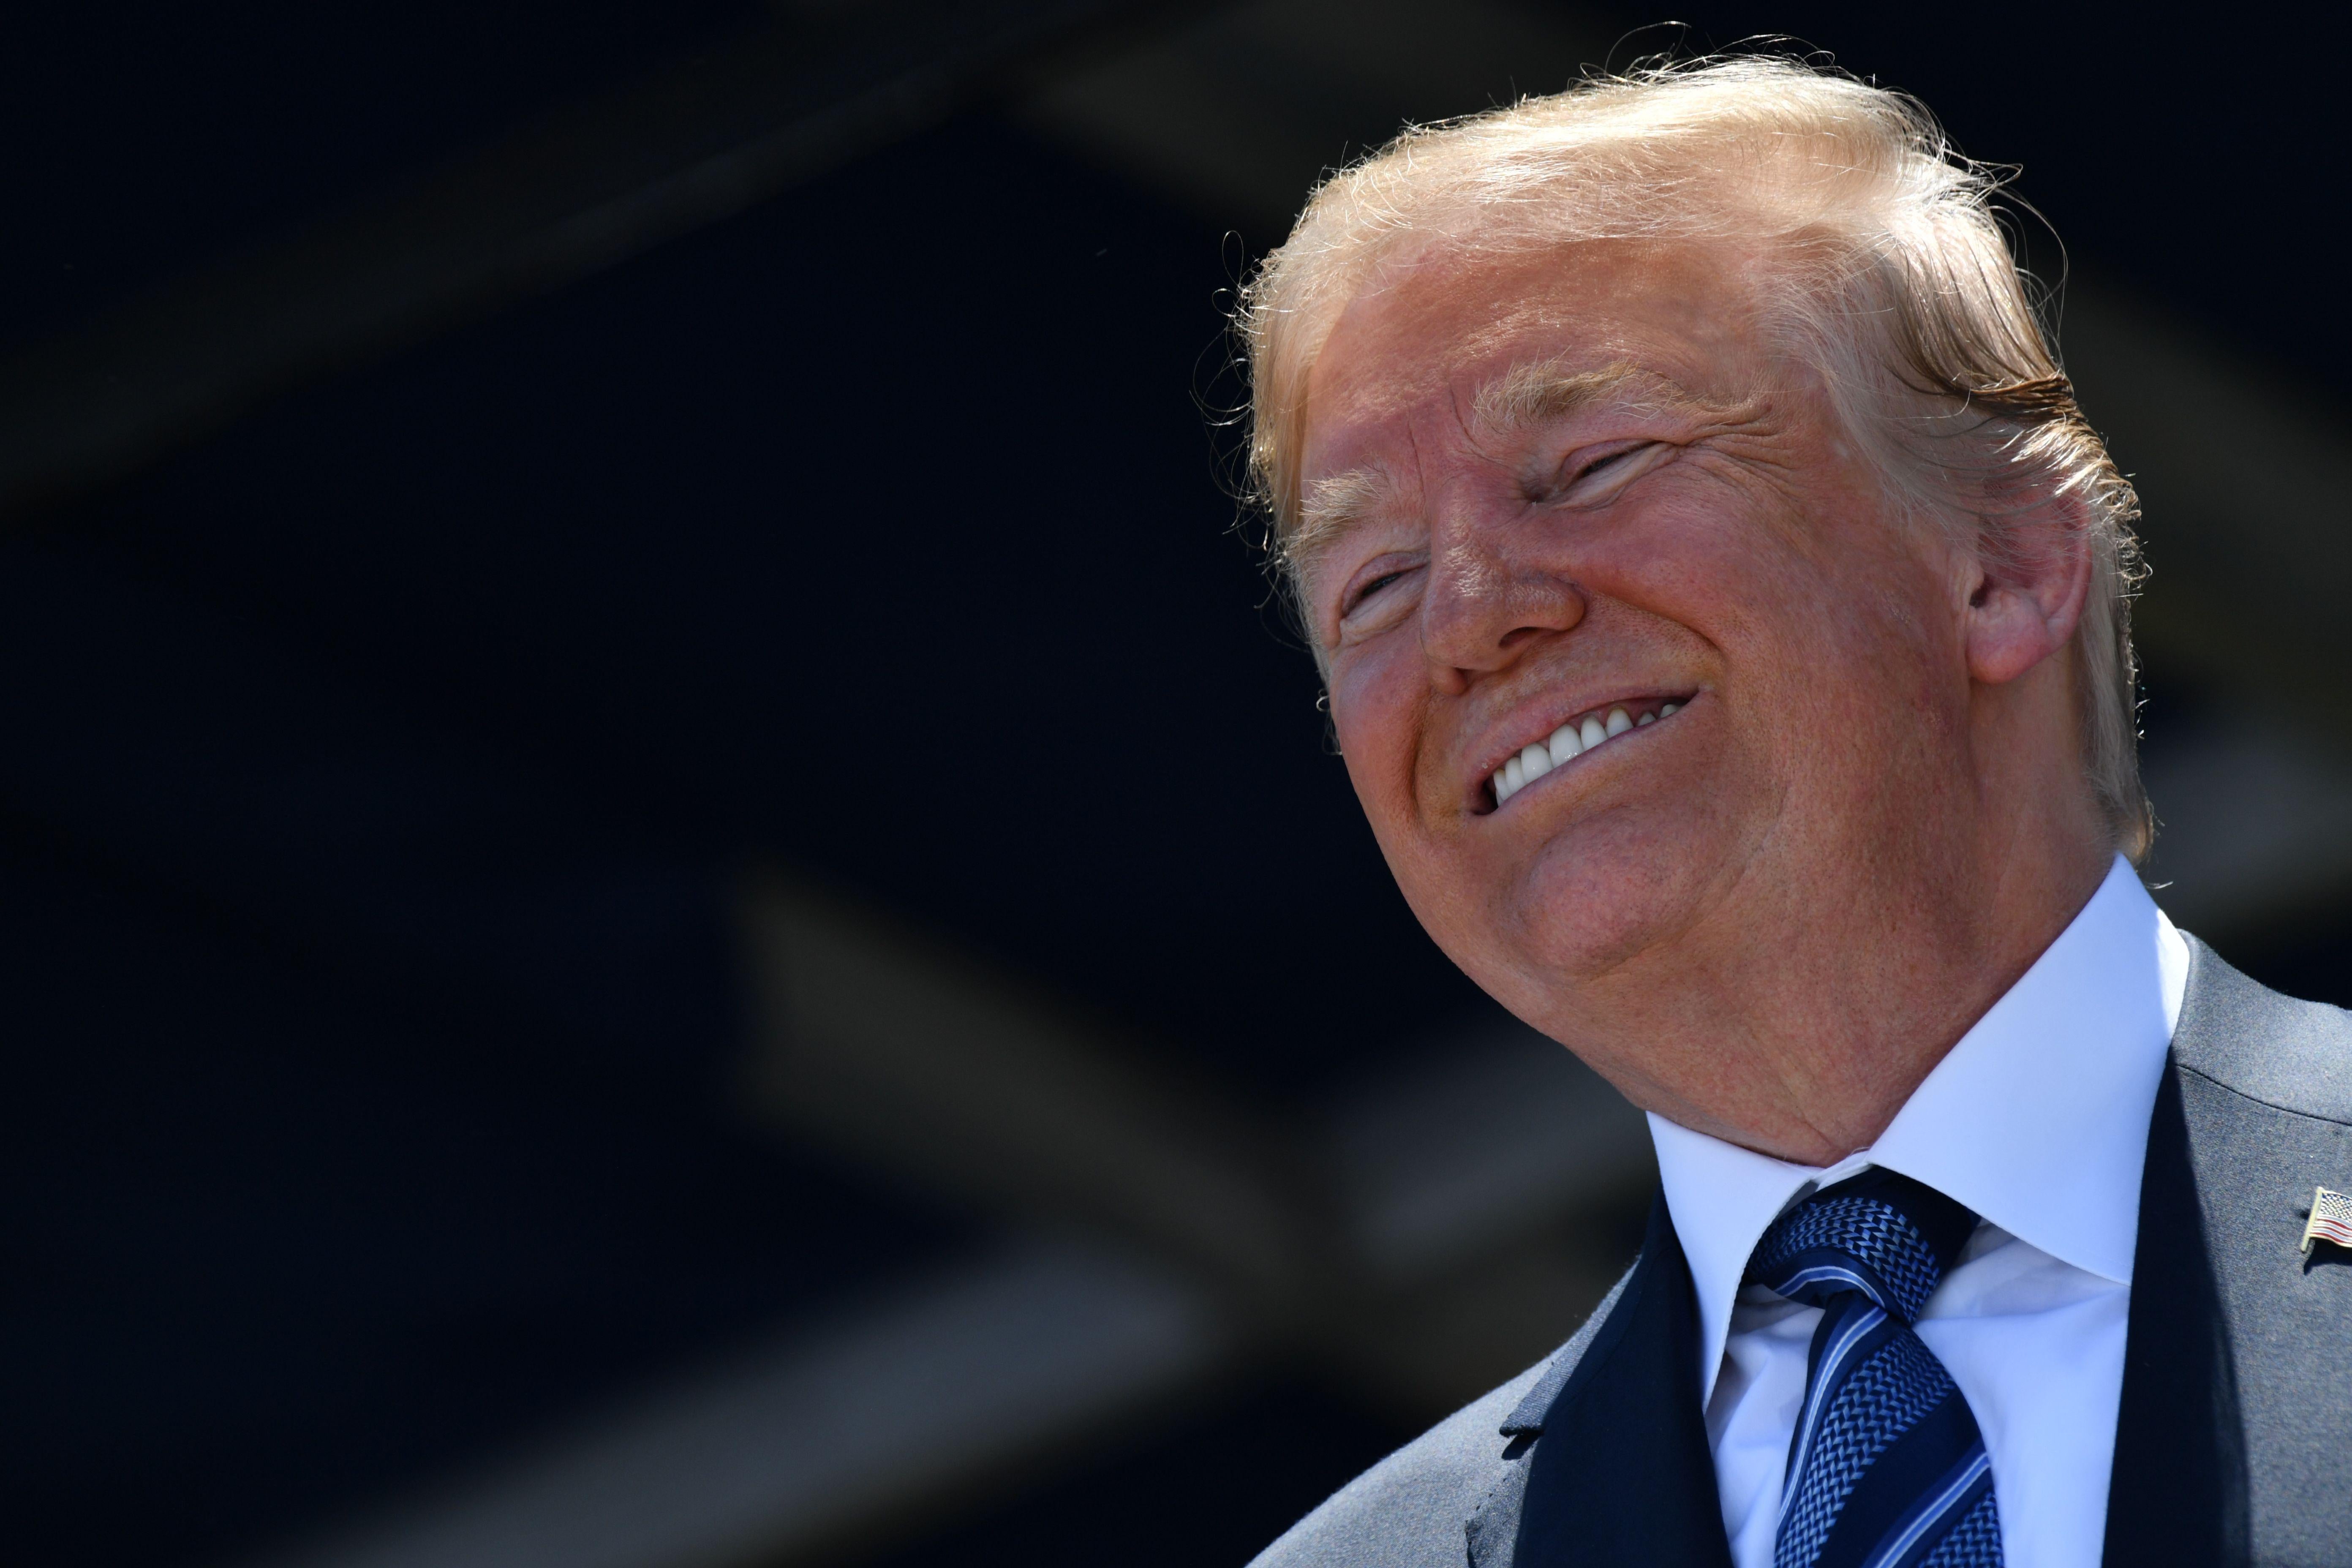 US President Donald Trump smiles after an address on May 25, 2018 in Annapolis, Maryland.